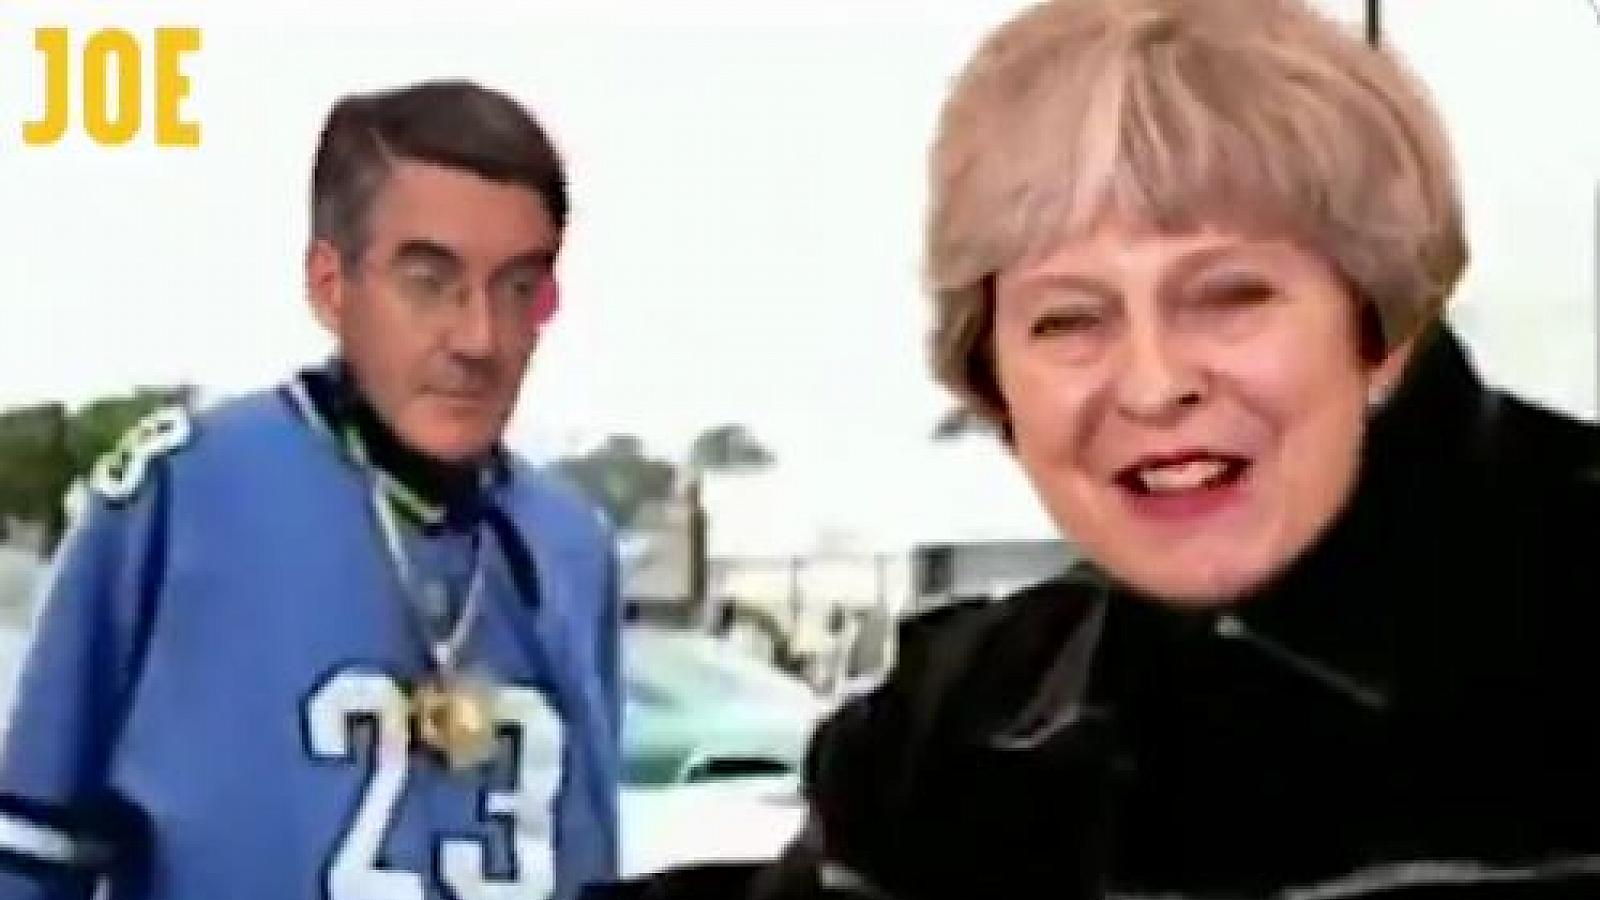 ‘Still M.A.Y’: JOE creates another viral classic featuring PM as Dr Dre